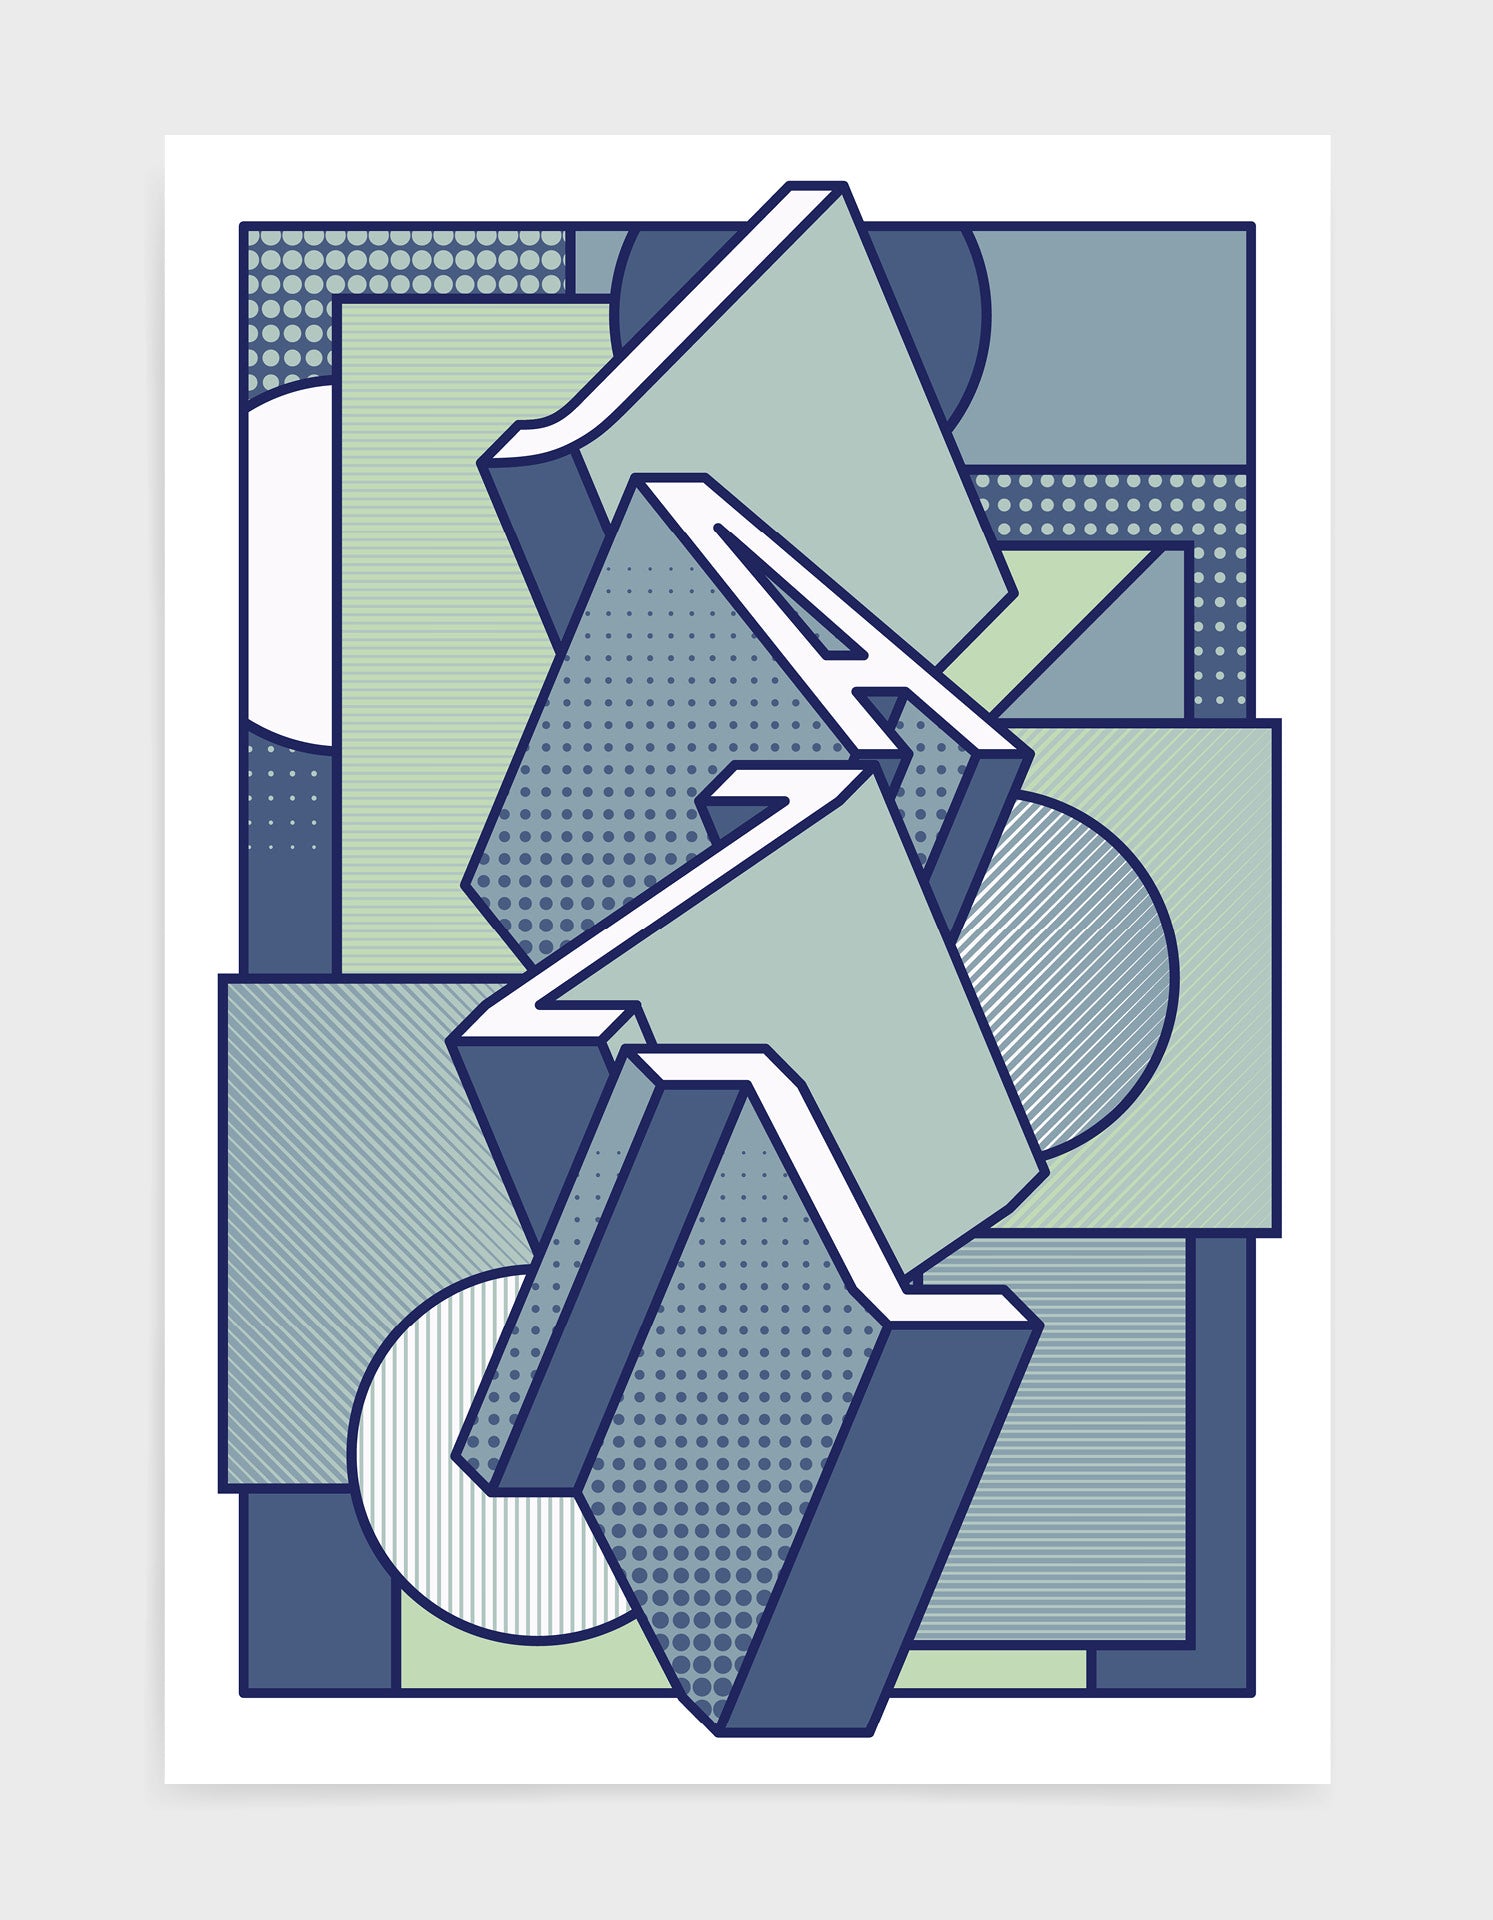 Jazz music art print featuring a geometric abstract pattern in bold shapes and blue tone colours. Block typography depicts the word Jazz in tumbling text